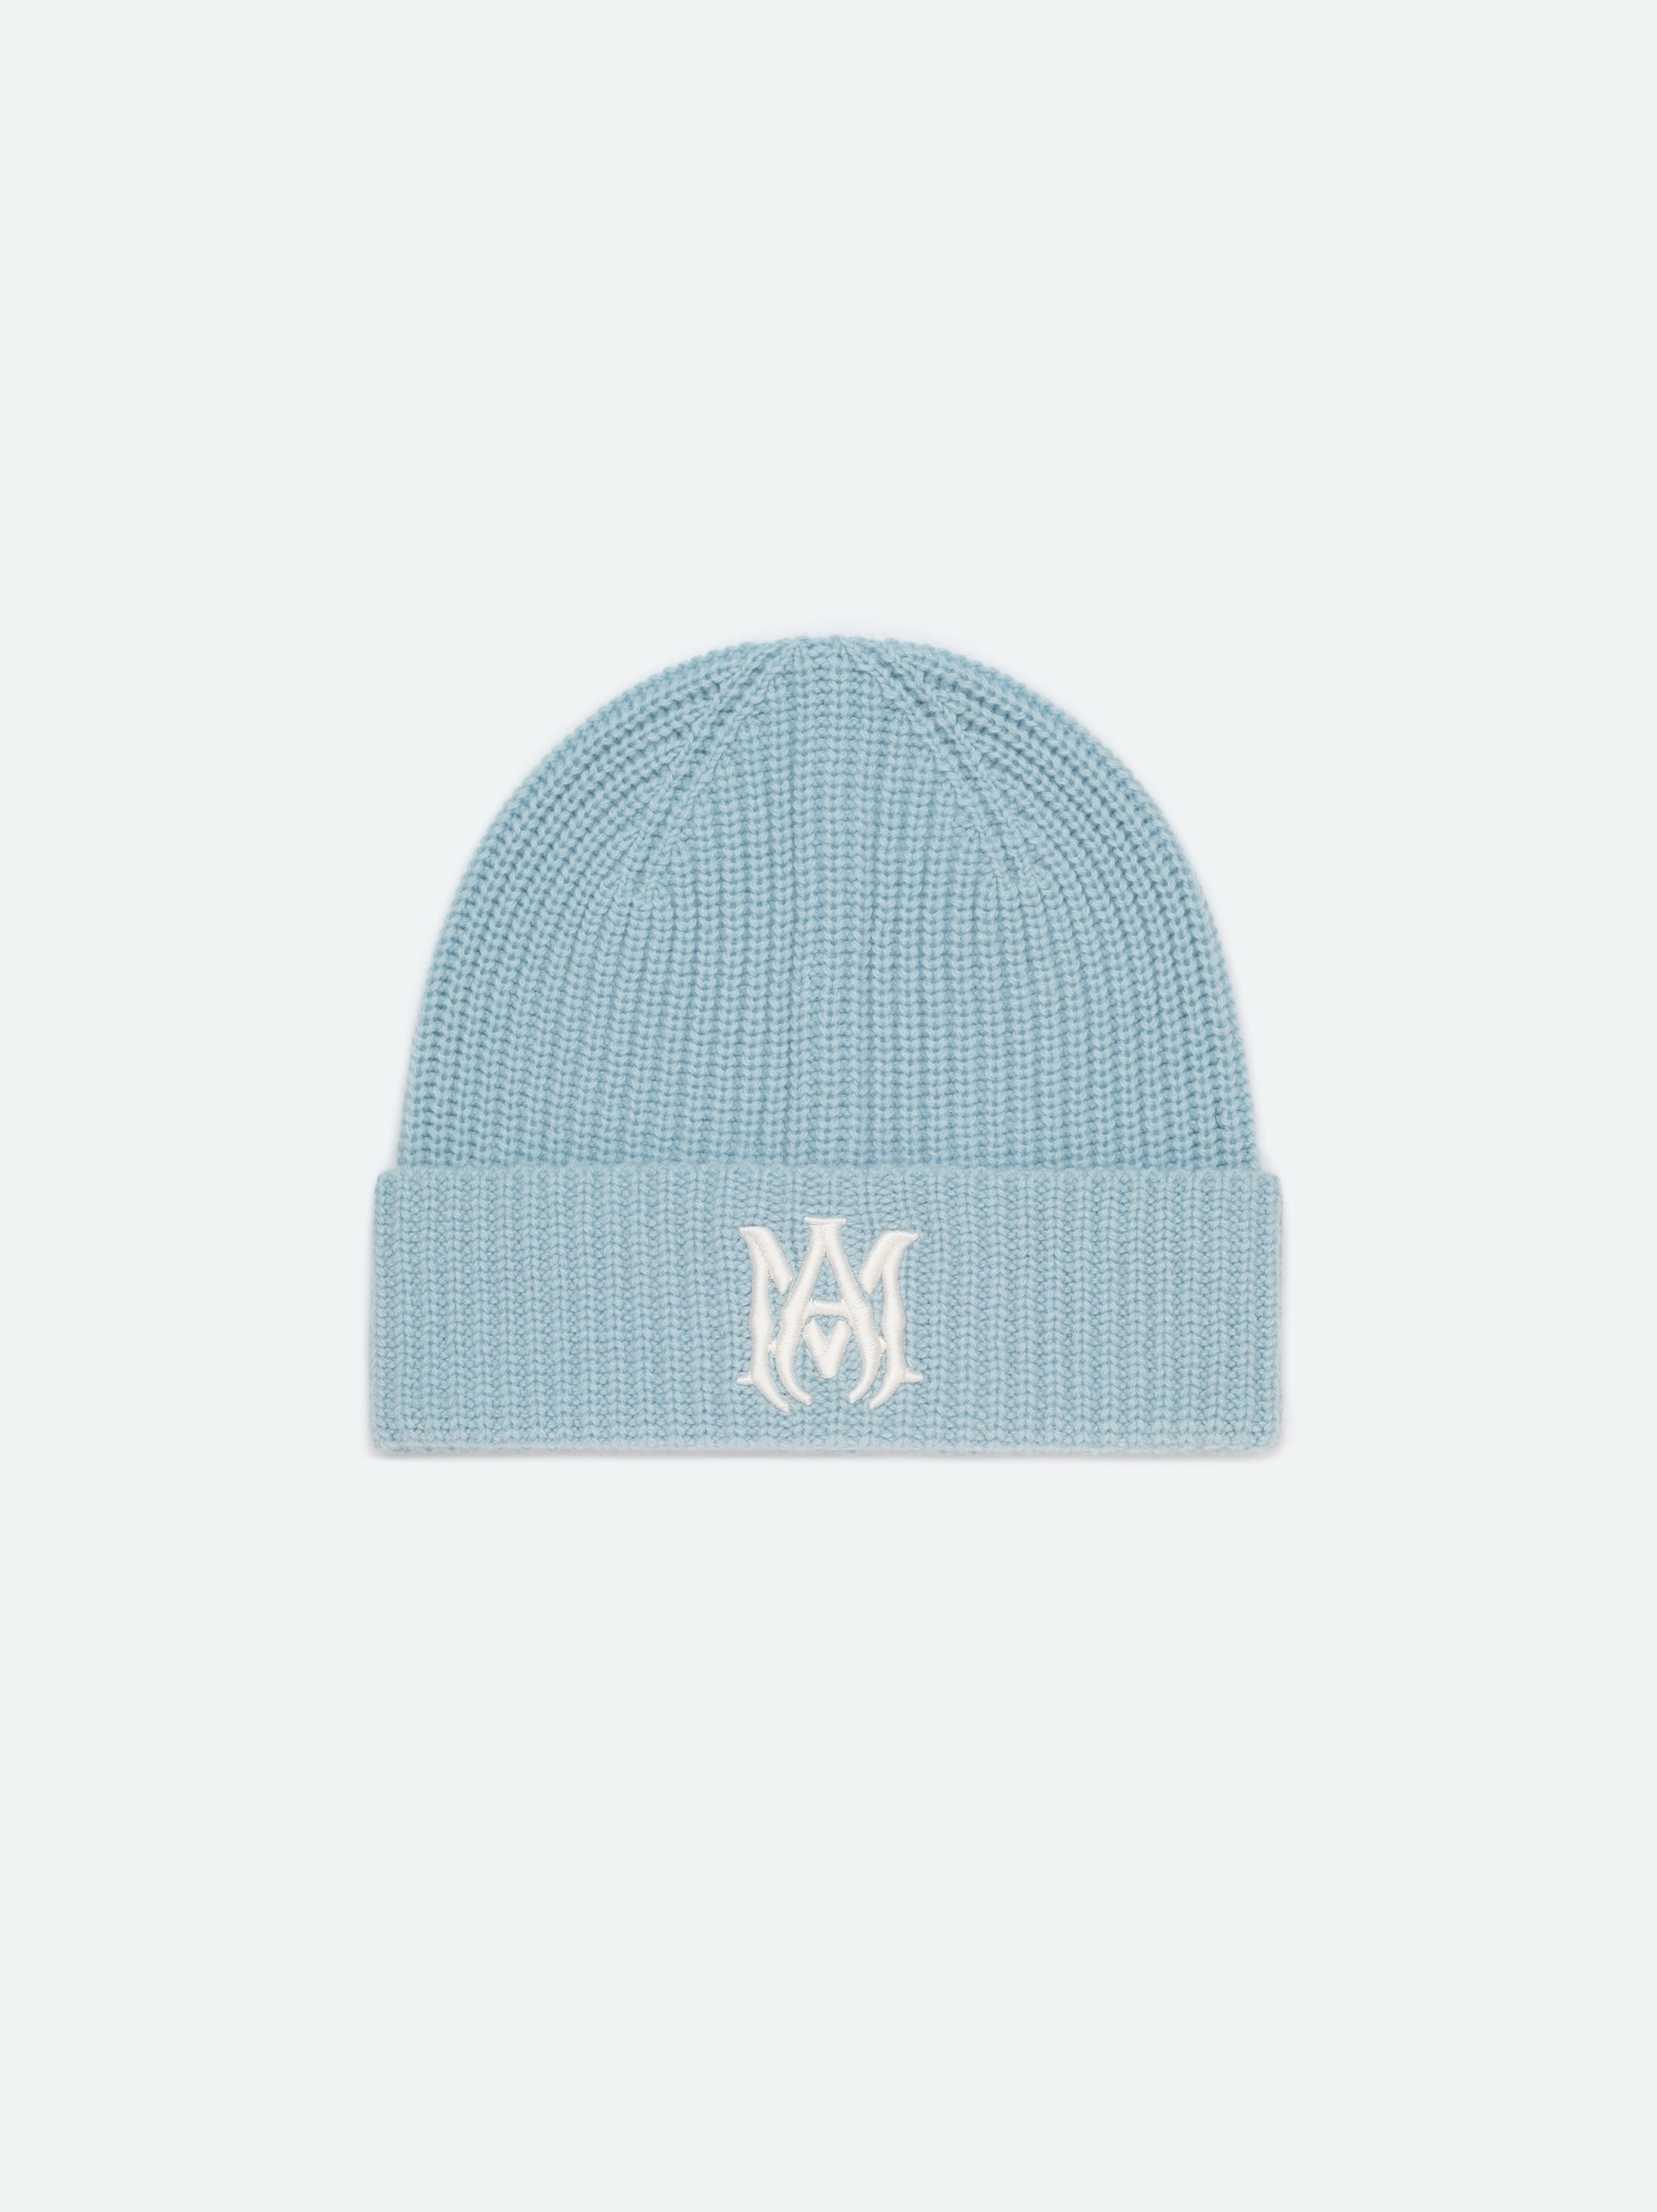 Product MA BEANIE - Air Blue featured image